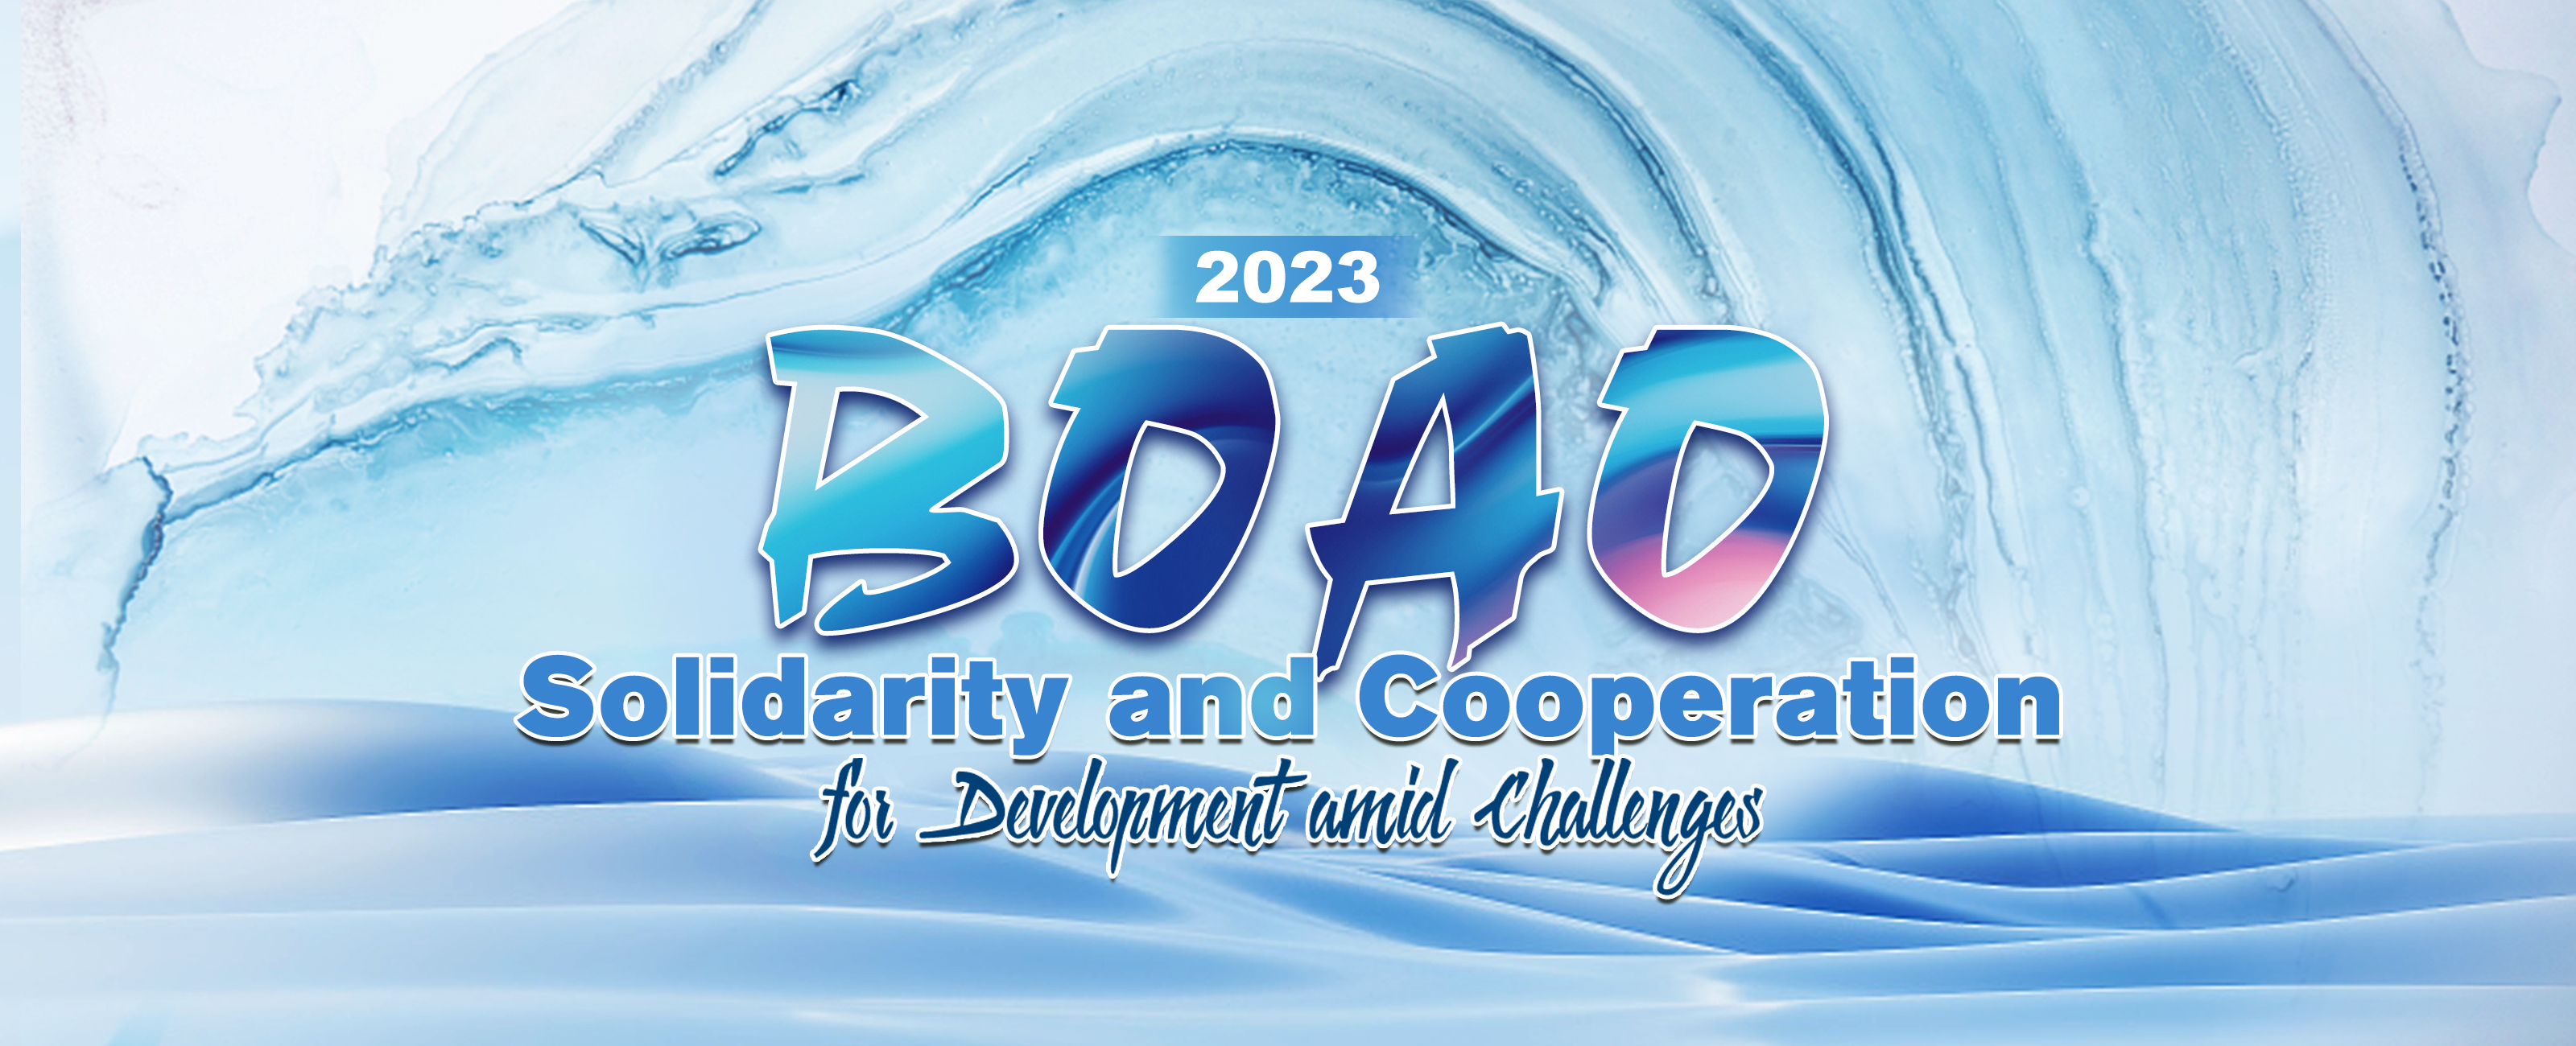 Boao 2023: Solidarity and Cooperation for Development amid Challenges